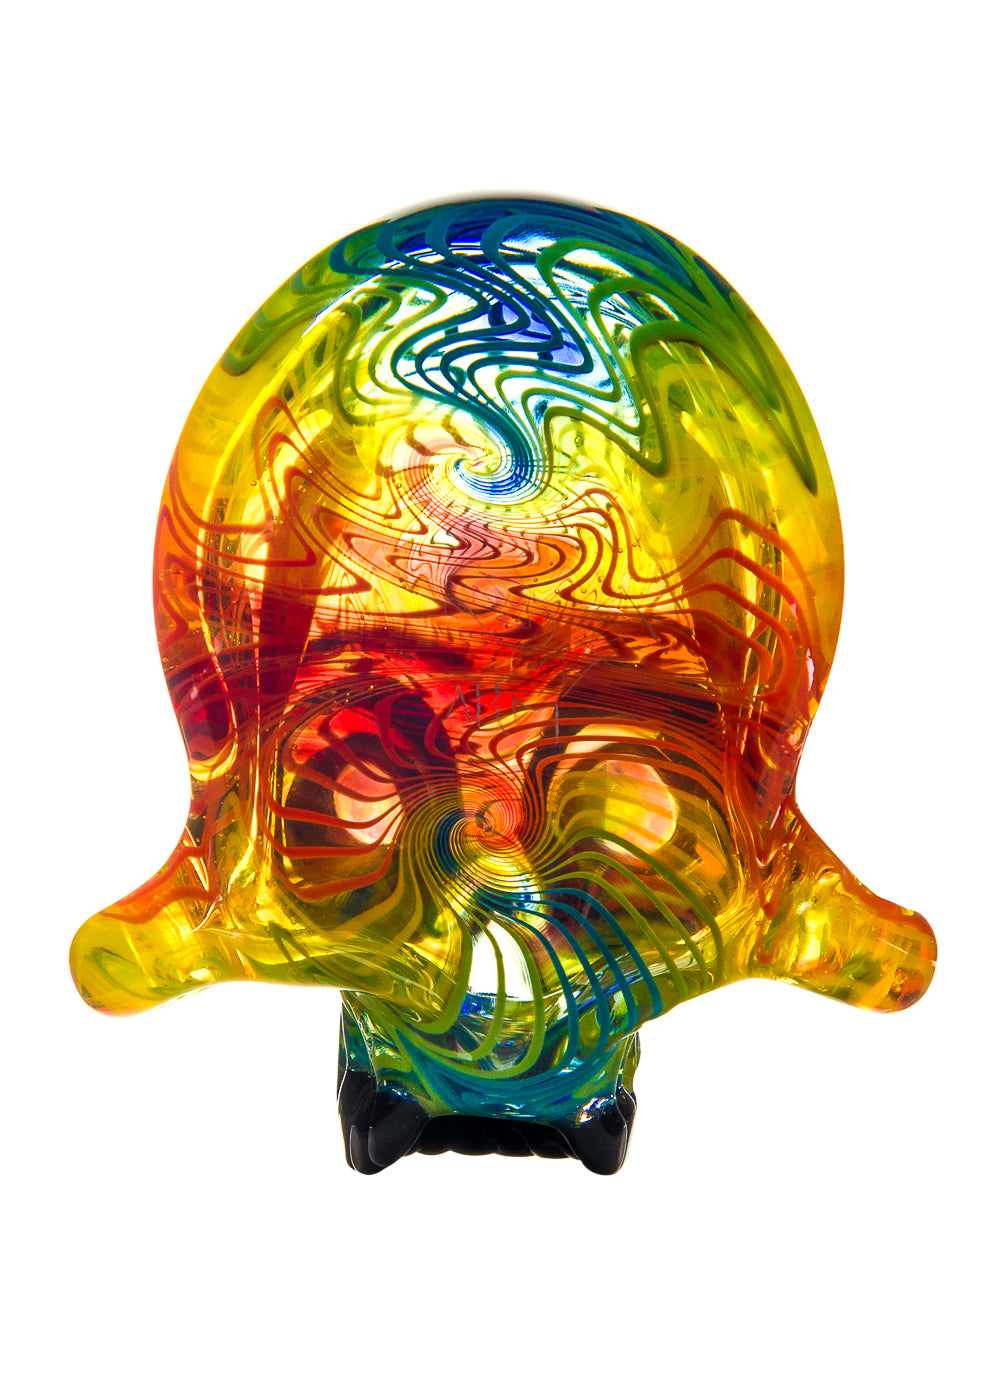 Illuzion Glass Galleries 2017 Annual 420 Party Collaboration Skull Pendant #2 by AKM and Cowboy